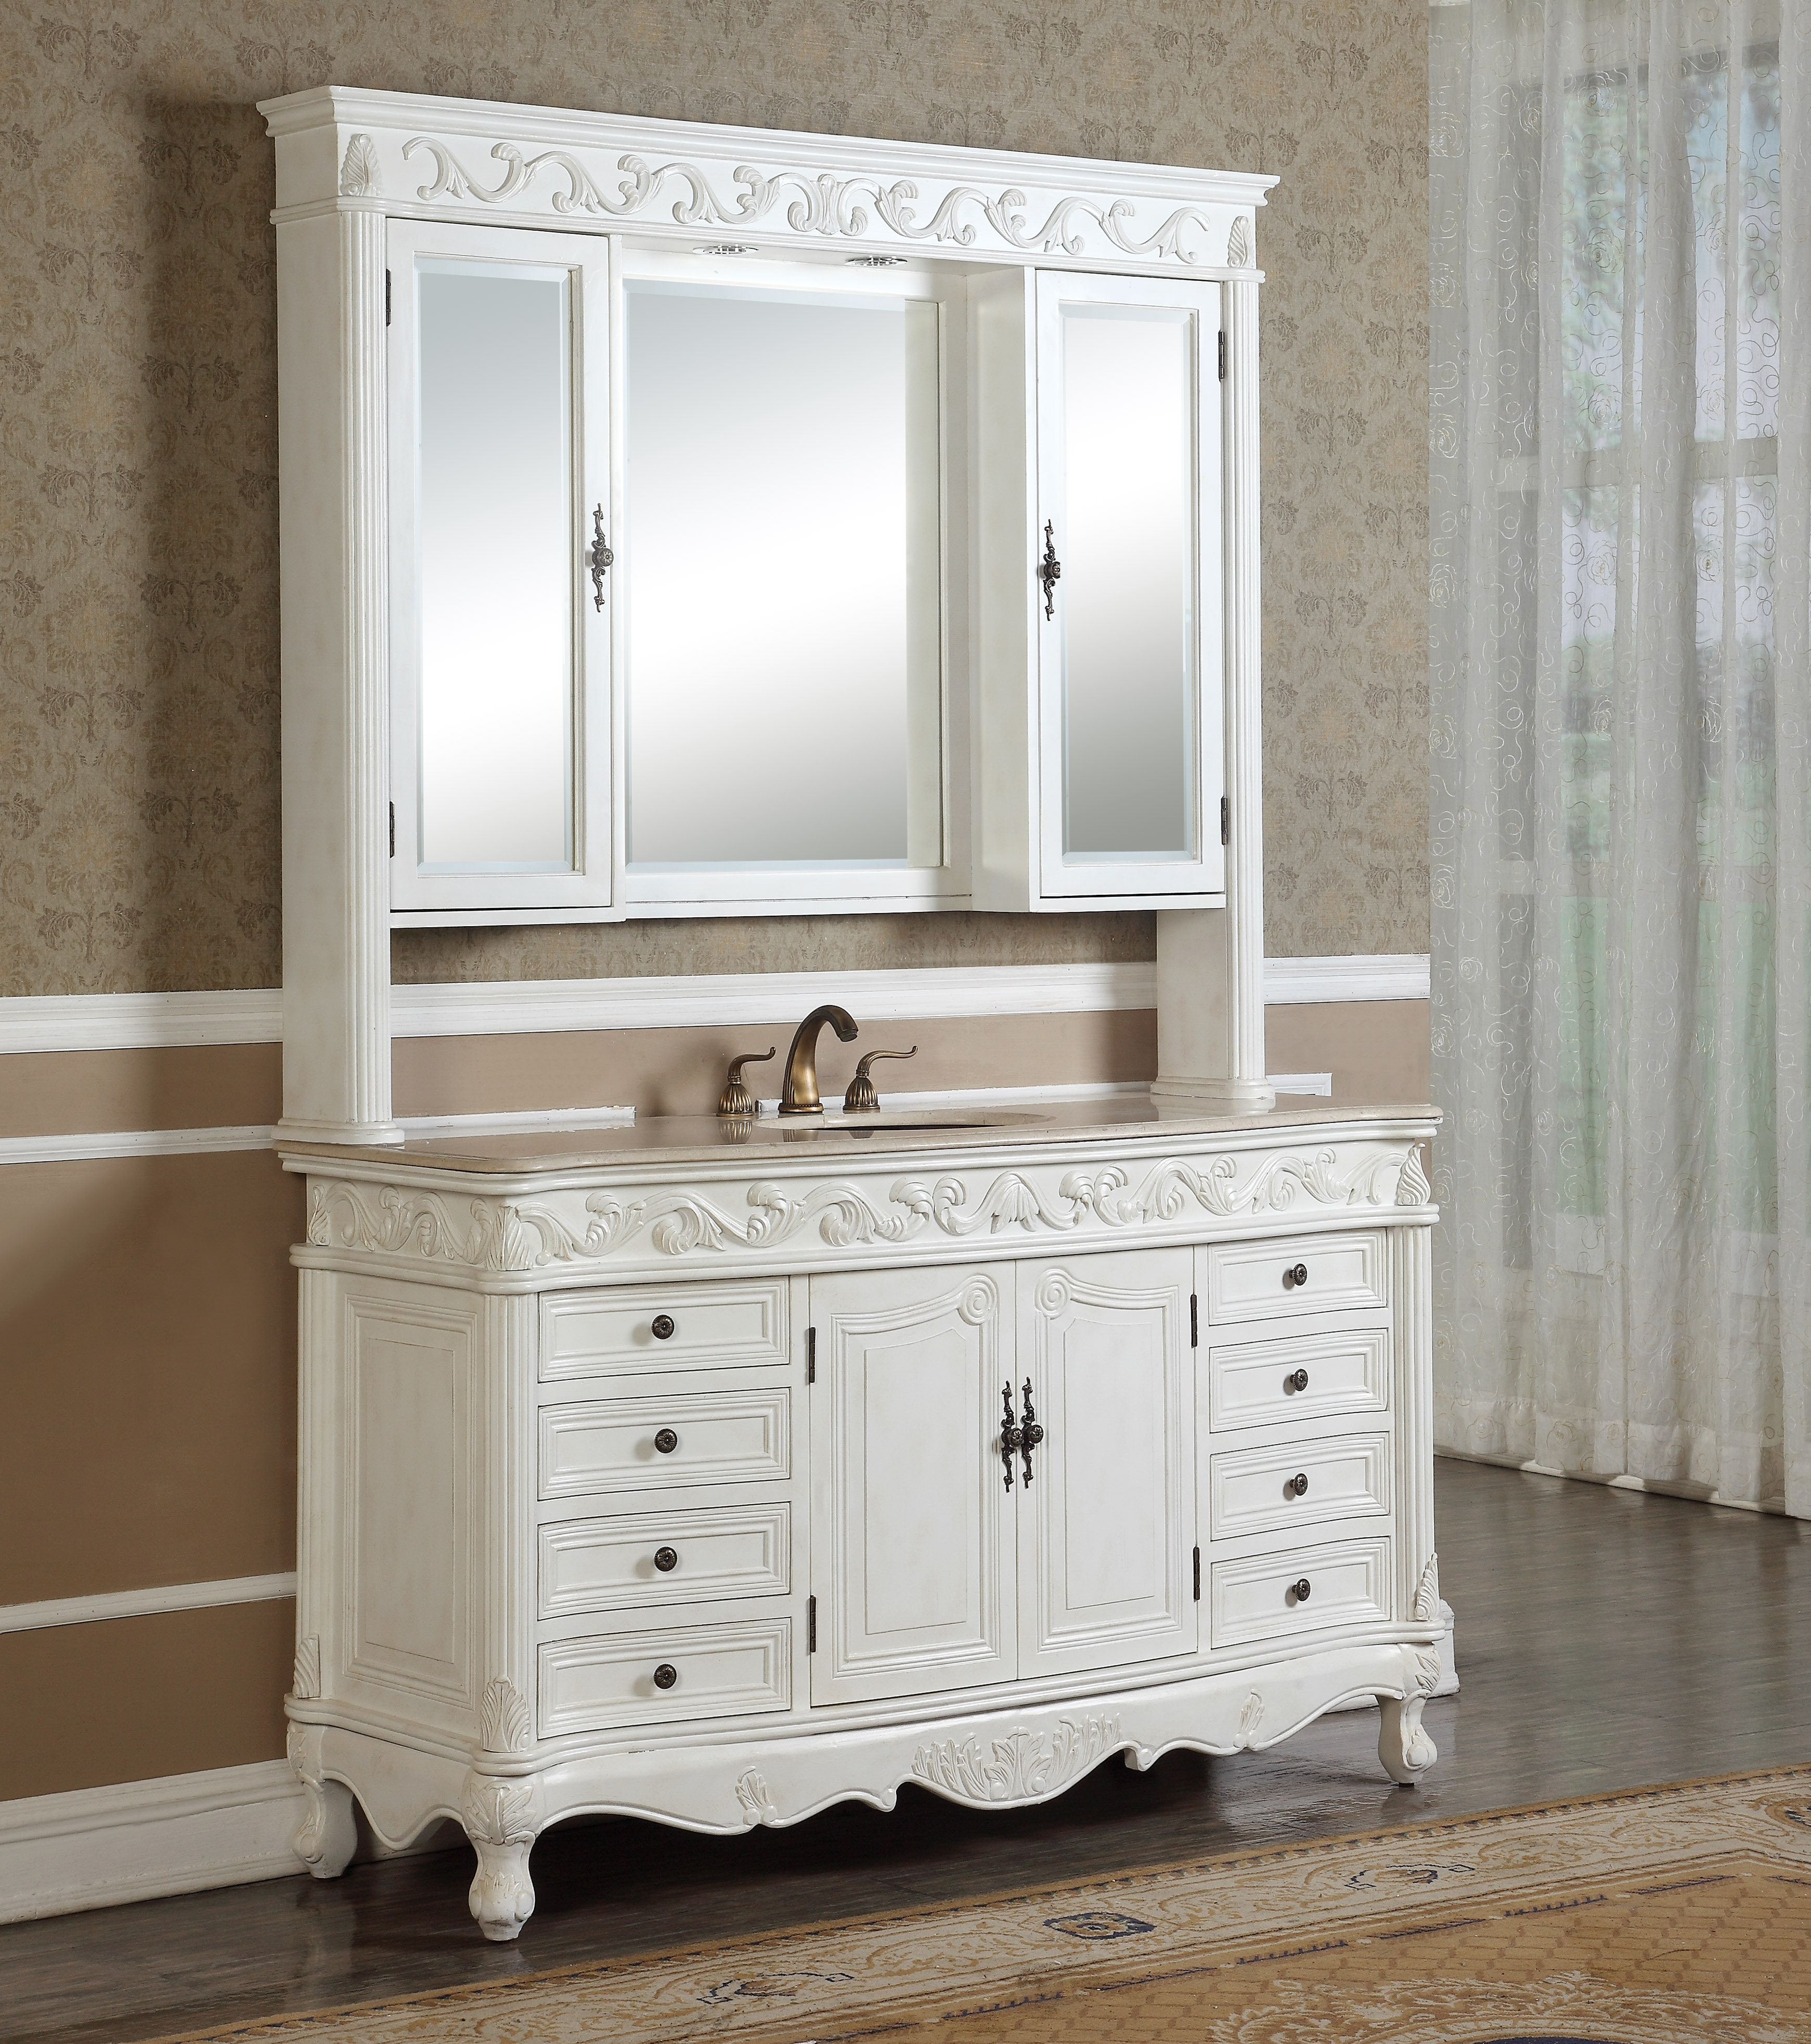 60" Antique White with Matching Medicine Cabinet, Mirror, and Linen Cabinet option, Imperial White Marble Top